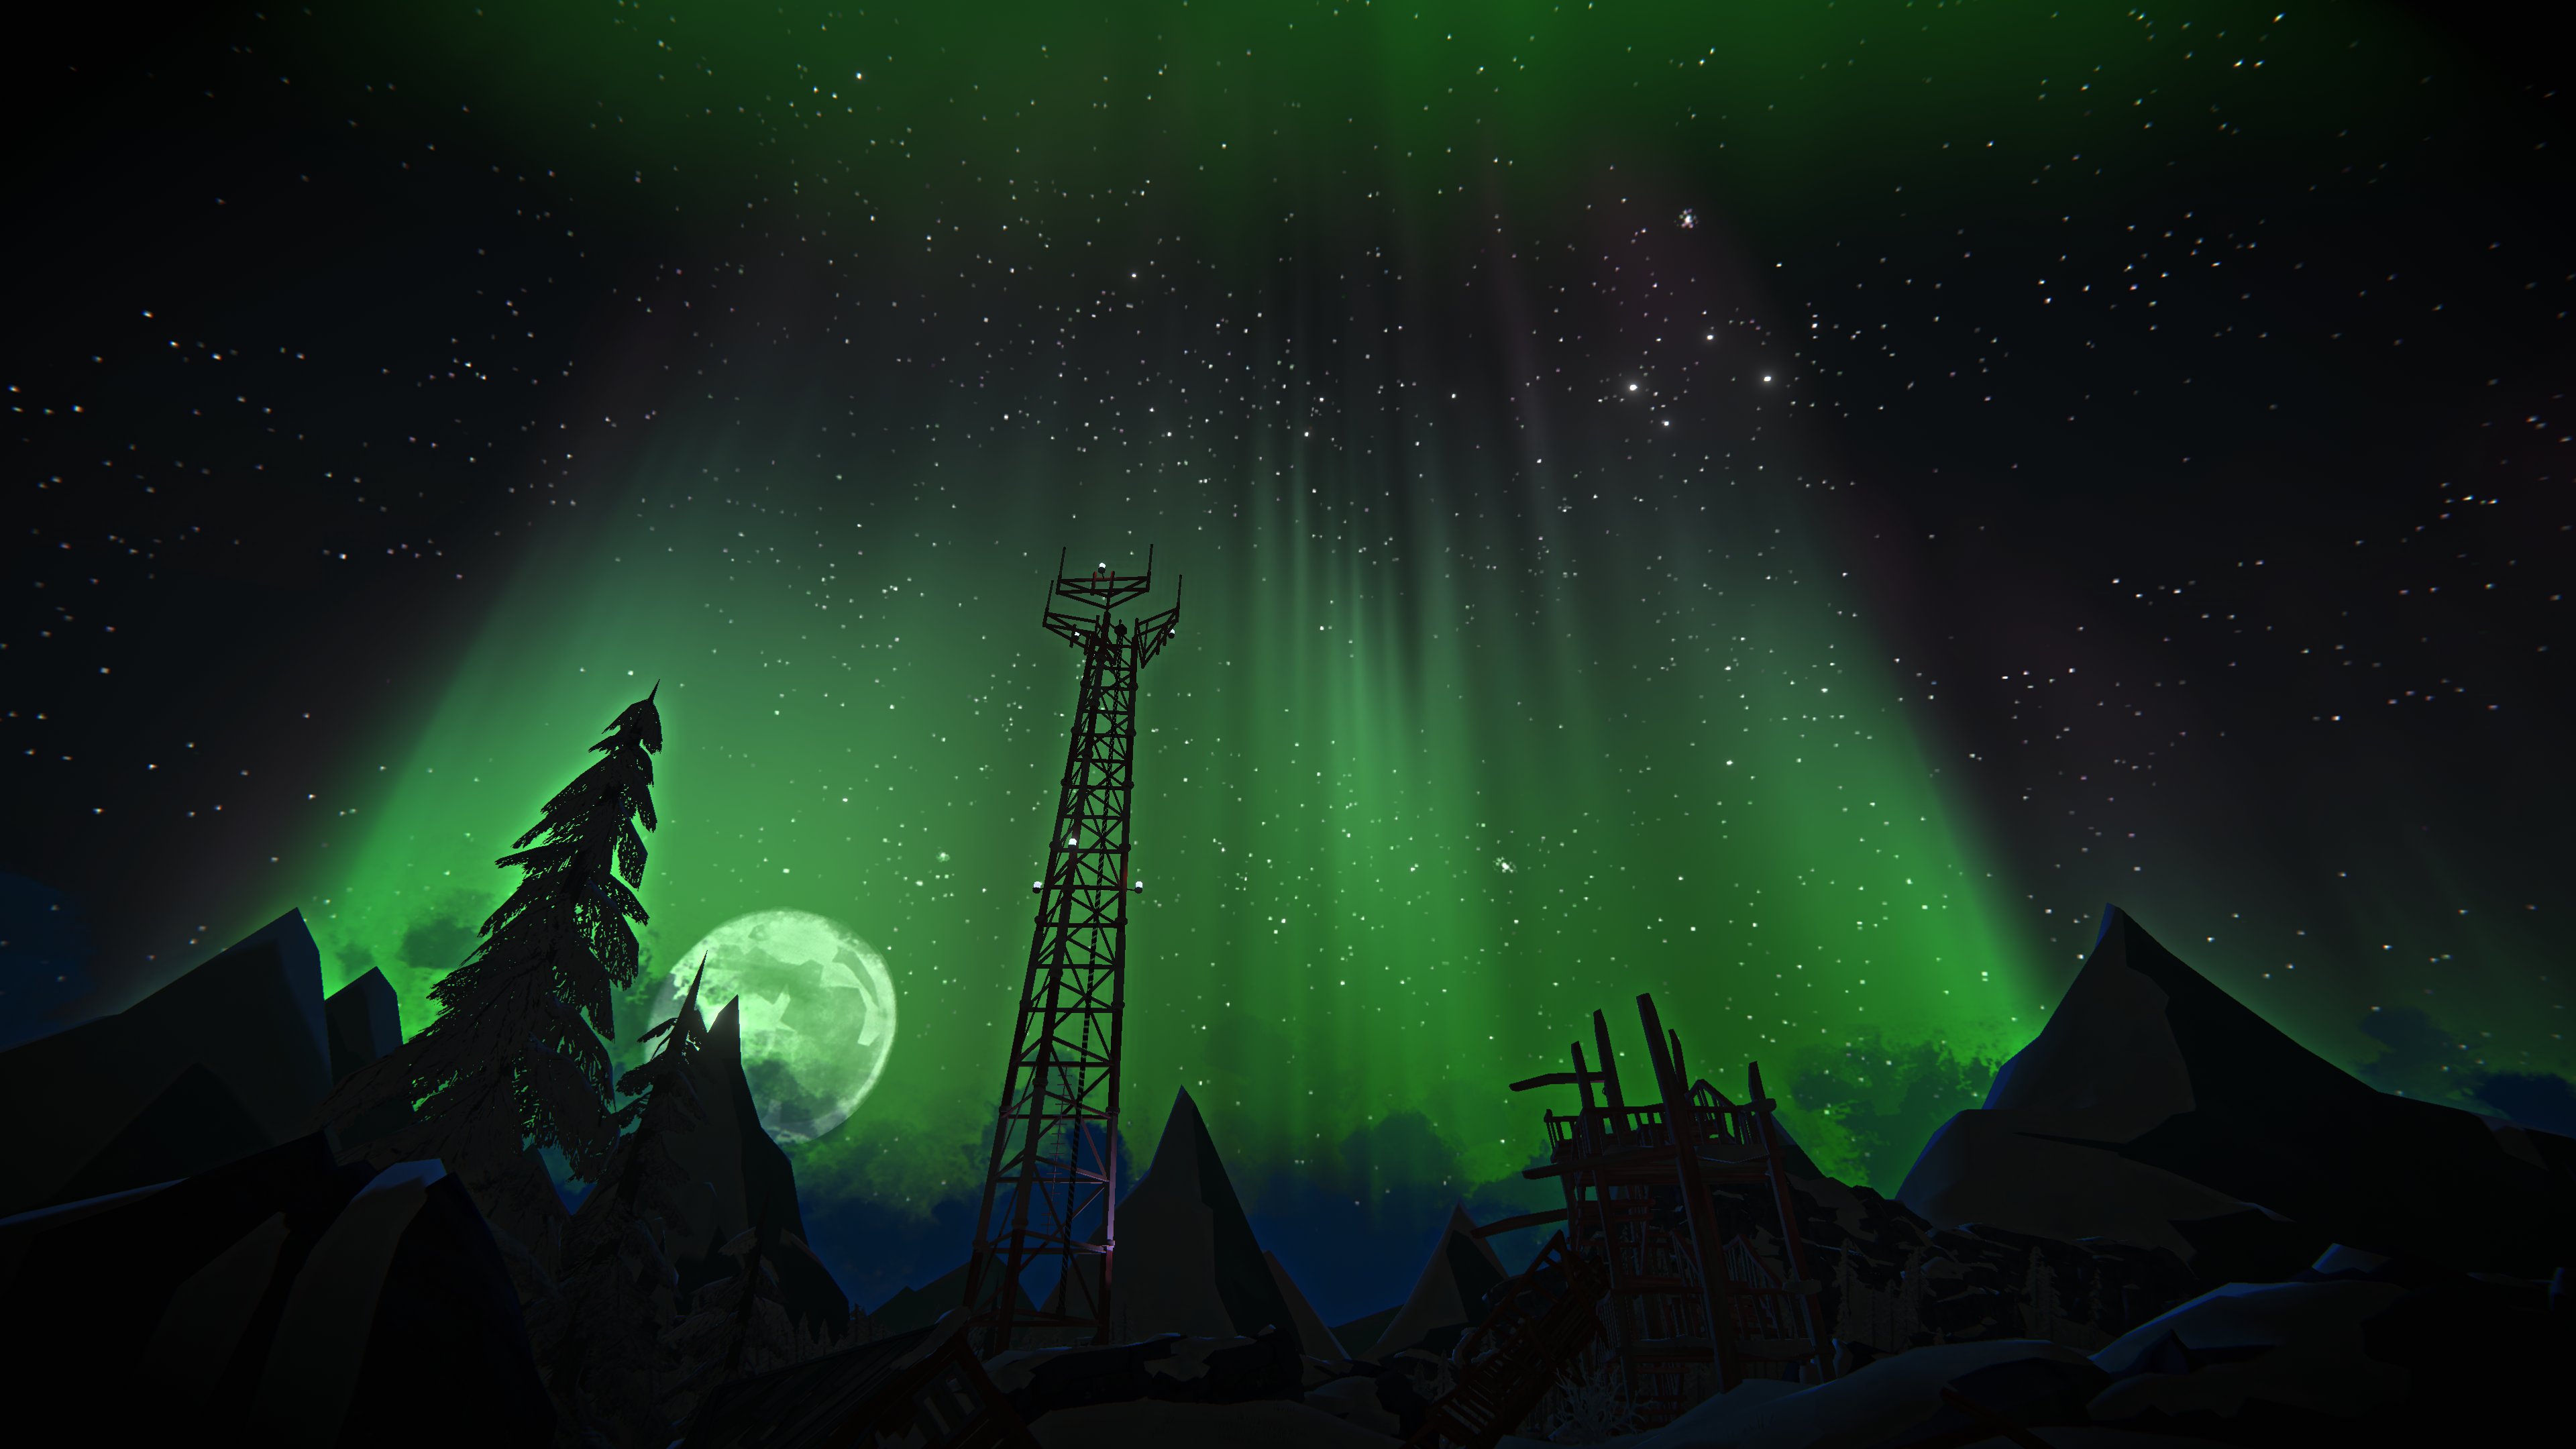 Green aurora borealis with a full moon and the silhouette of a tall transmission tower in front.